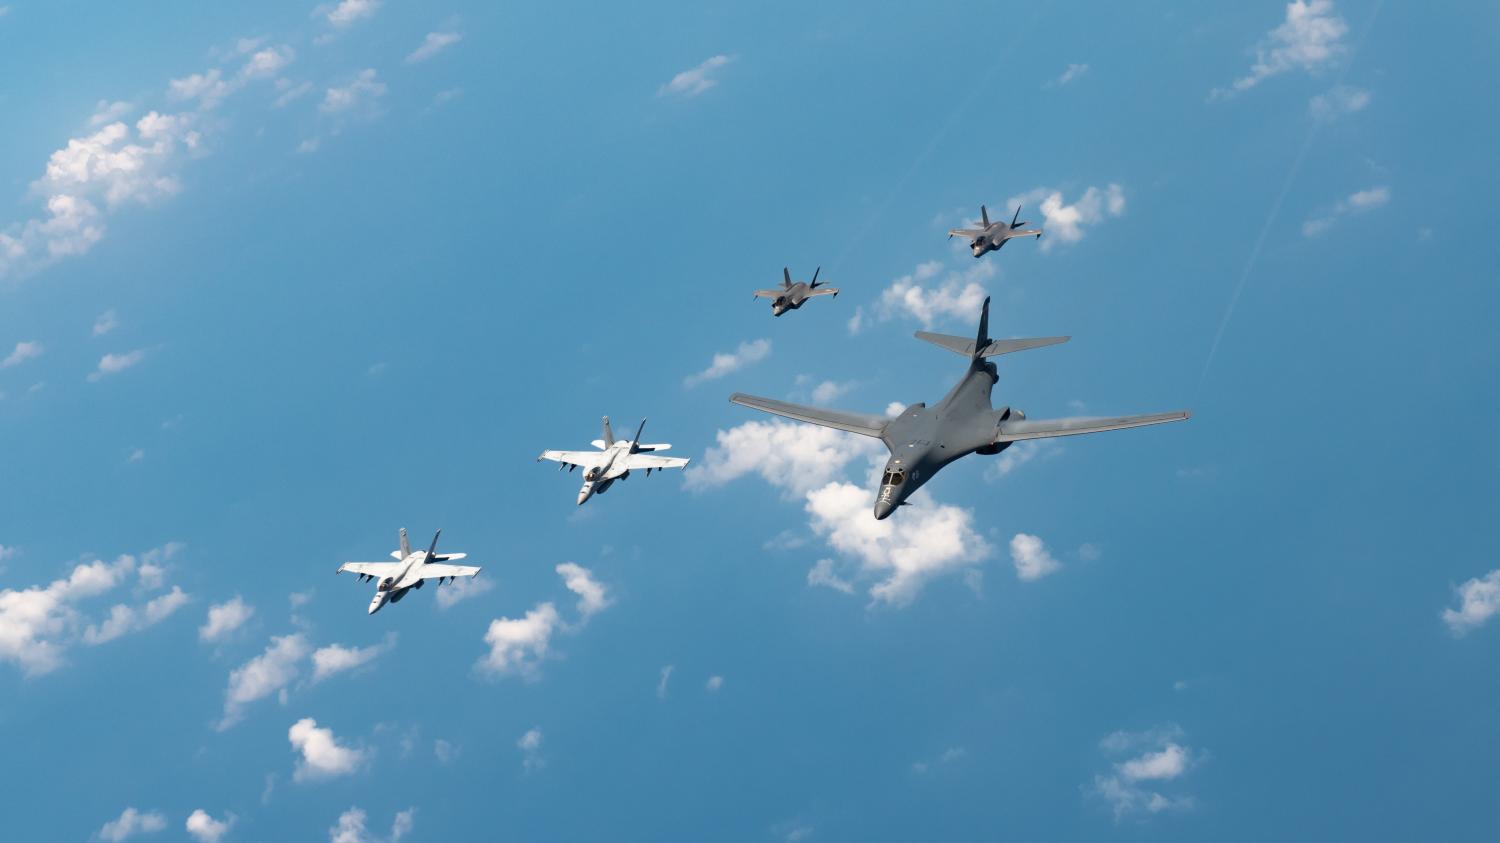 U.S. Navy Carrier Air Wing five F/A-18 Super Hornets, Marine Corps Marine Fighter Attack Squadron 121 F-35 Lightning IIs, all assigned to Marine Corps Air Station Iwakuni, Japan, and a U.S. Air Force 37th Bomb Squadron B-1B Lancer assigned to Ellsworth Air Force Base, S.D., conduct a large-scale joint and bilateral integration training exercise Aug. 18, 2020. Four B-1B Lancers, two B-2 Spirit Stealth Bombers, and four F-15C Eagles conducted Bomber Task Force missions simultaneously within the Indo-Pacific region over the course of 24 hours. Pacific Air Forces routinely conducts BTF operations to show the United States’ commitment to allies and partners in the Indo-Pacific area of responsibility.Where: Kadena Air Base, Okinawa, JapanWhen: 18 Aug 2020Credit: USAF/Cover Images**Editorial use only**